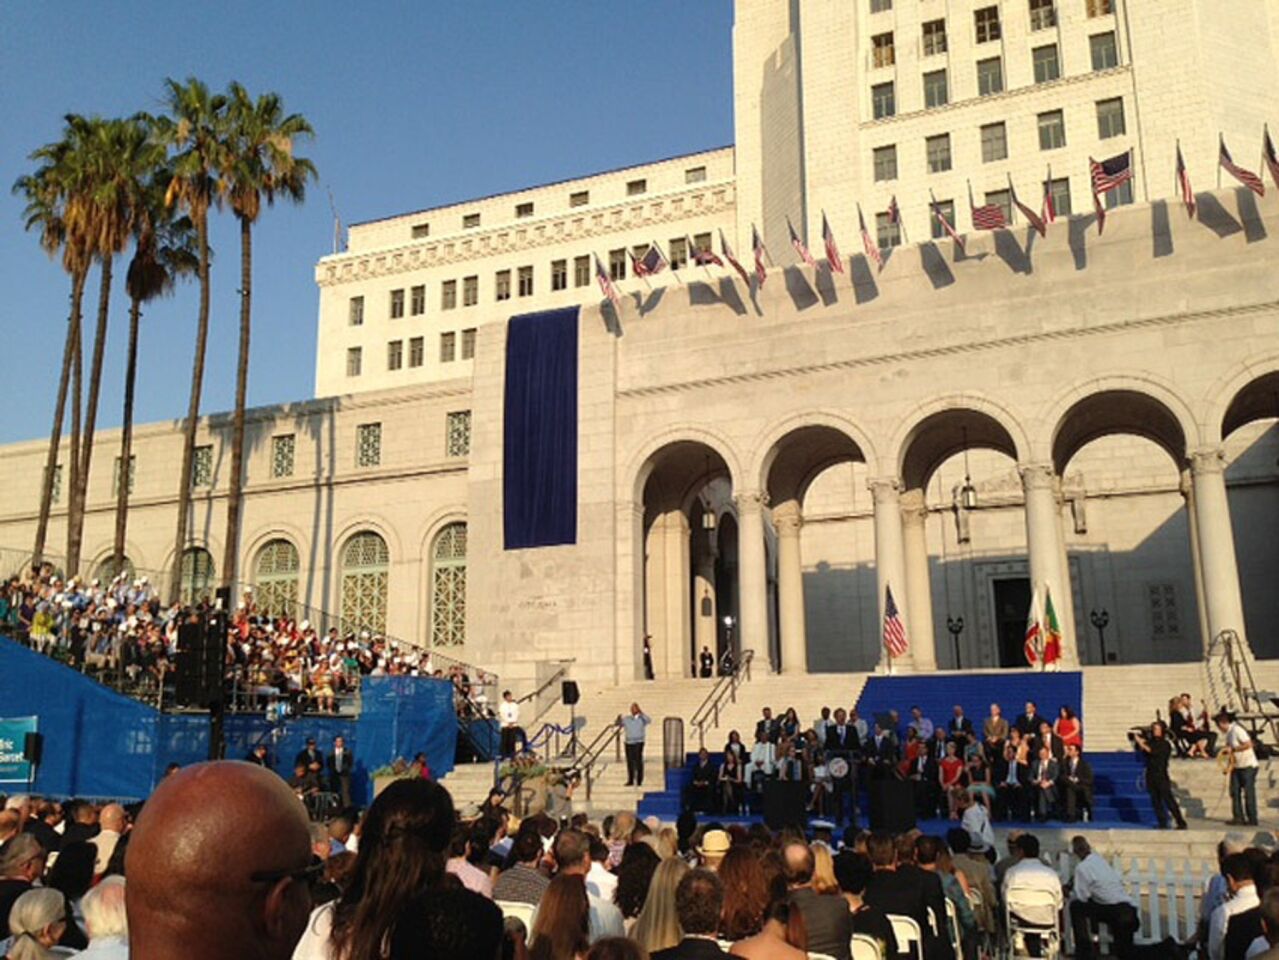 Politicians gather for the inauguration of Eric Garcetti as mayor of Los Angeles. He vowed to focus relentlessly on guiding the city's economic recovery, slashing business taxes, keeping film production from fleeing L.A. and spurring high-tech jobs on the Westside.